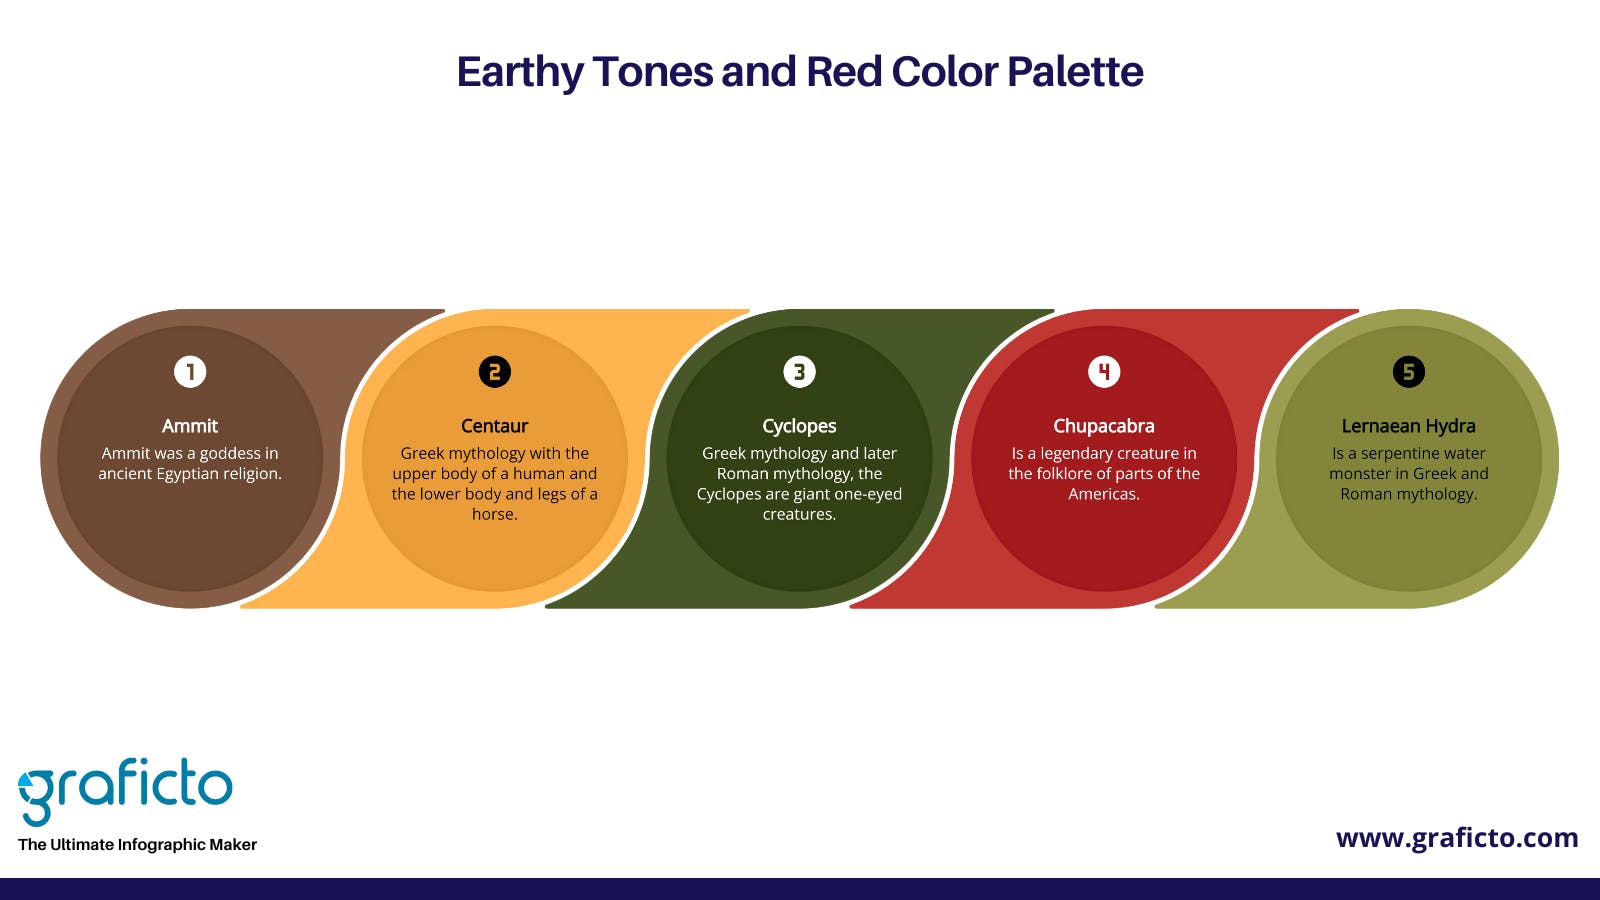 Earthy Tones and Red graficto Christmas Color Palettes